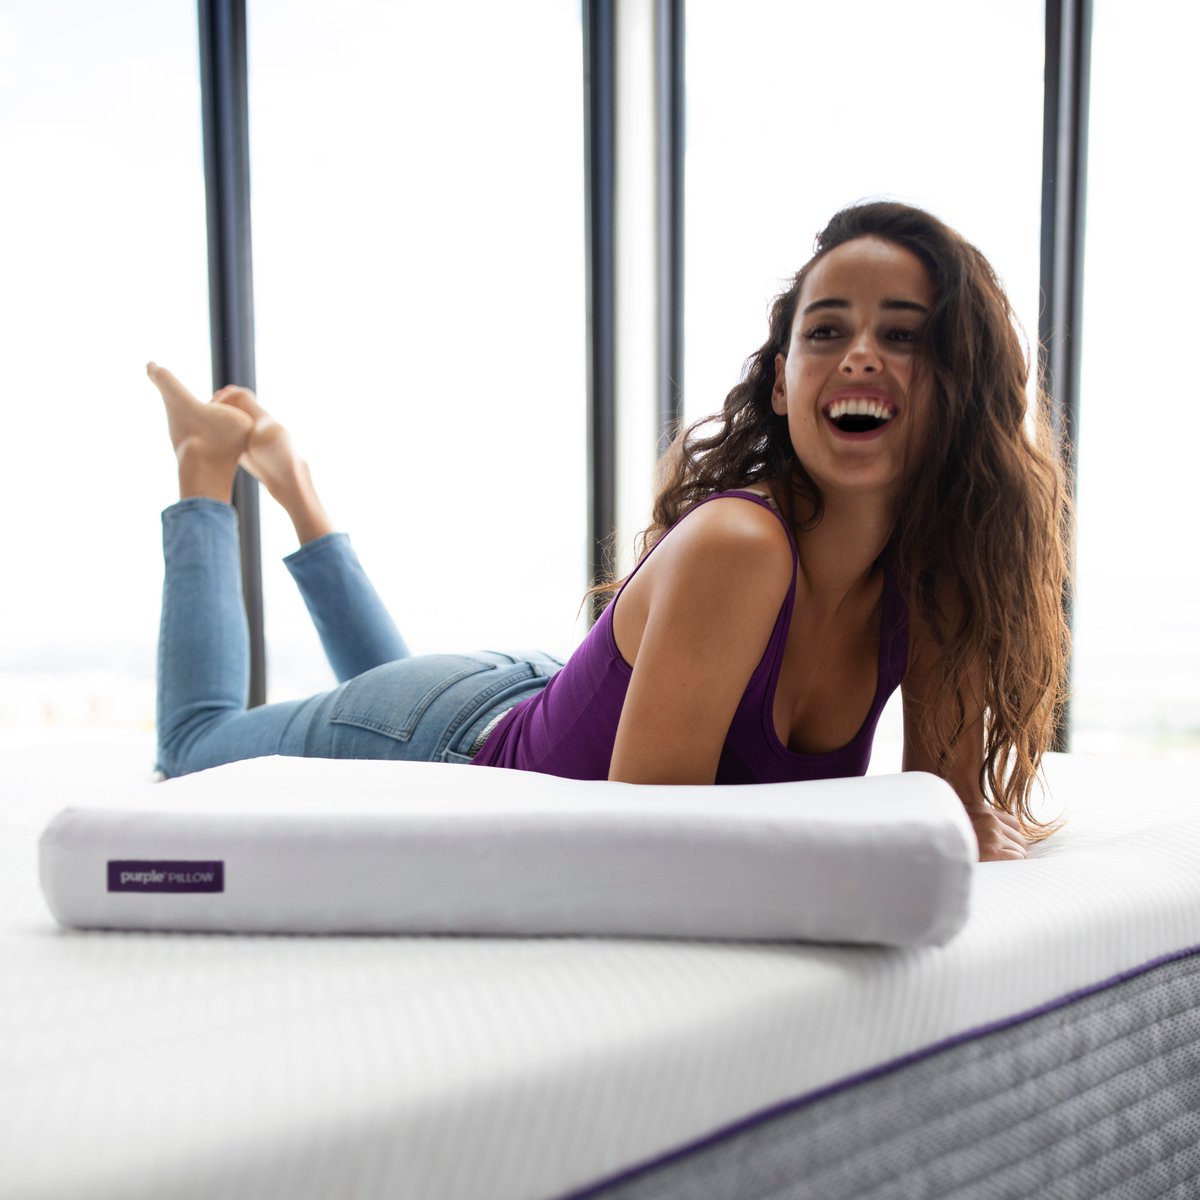 GIVEAWAY! Looking for something cool and supportive? Enter to win a Purple Pillow! All you need to do to qualify is RT and follow us. 💜 #Giveaways